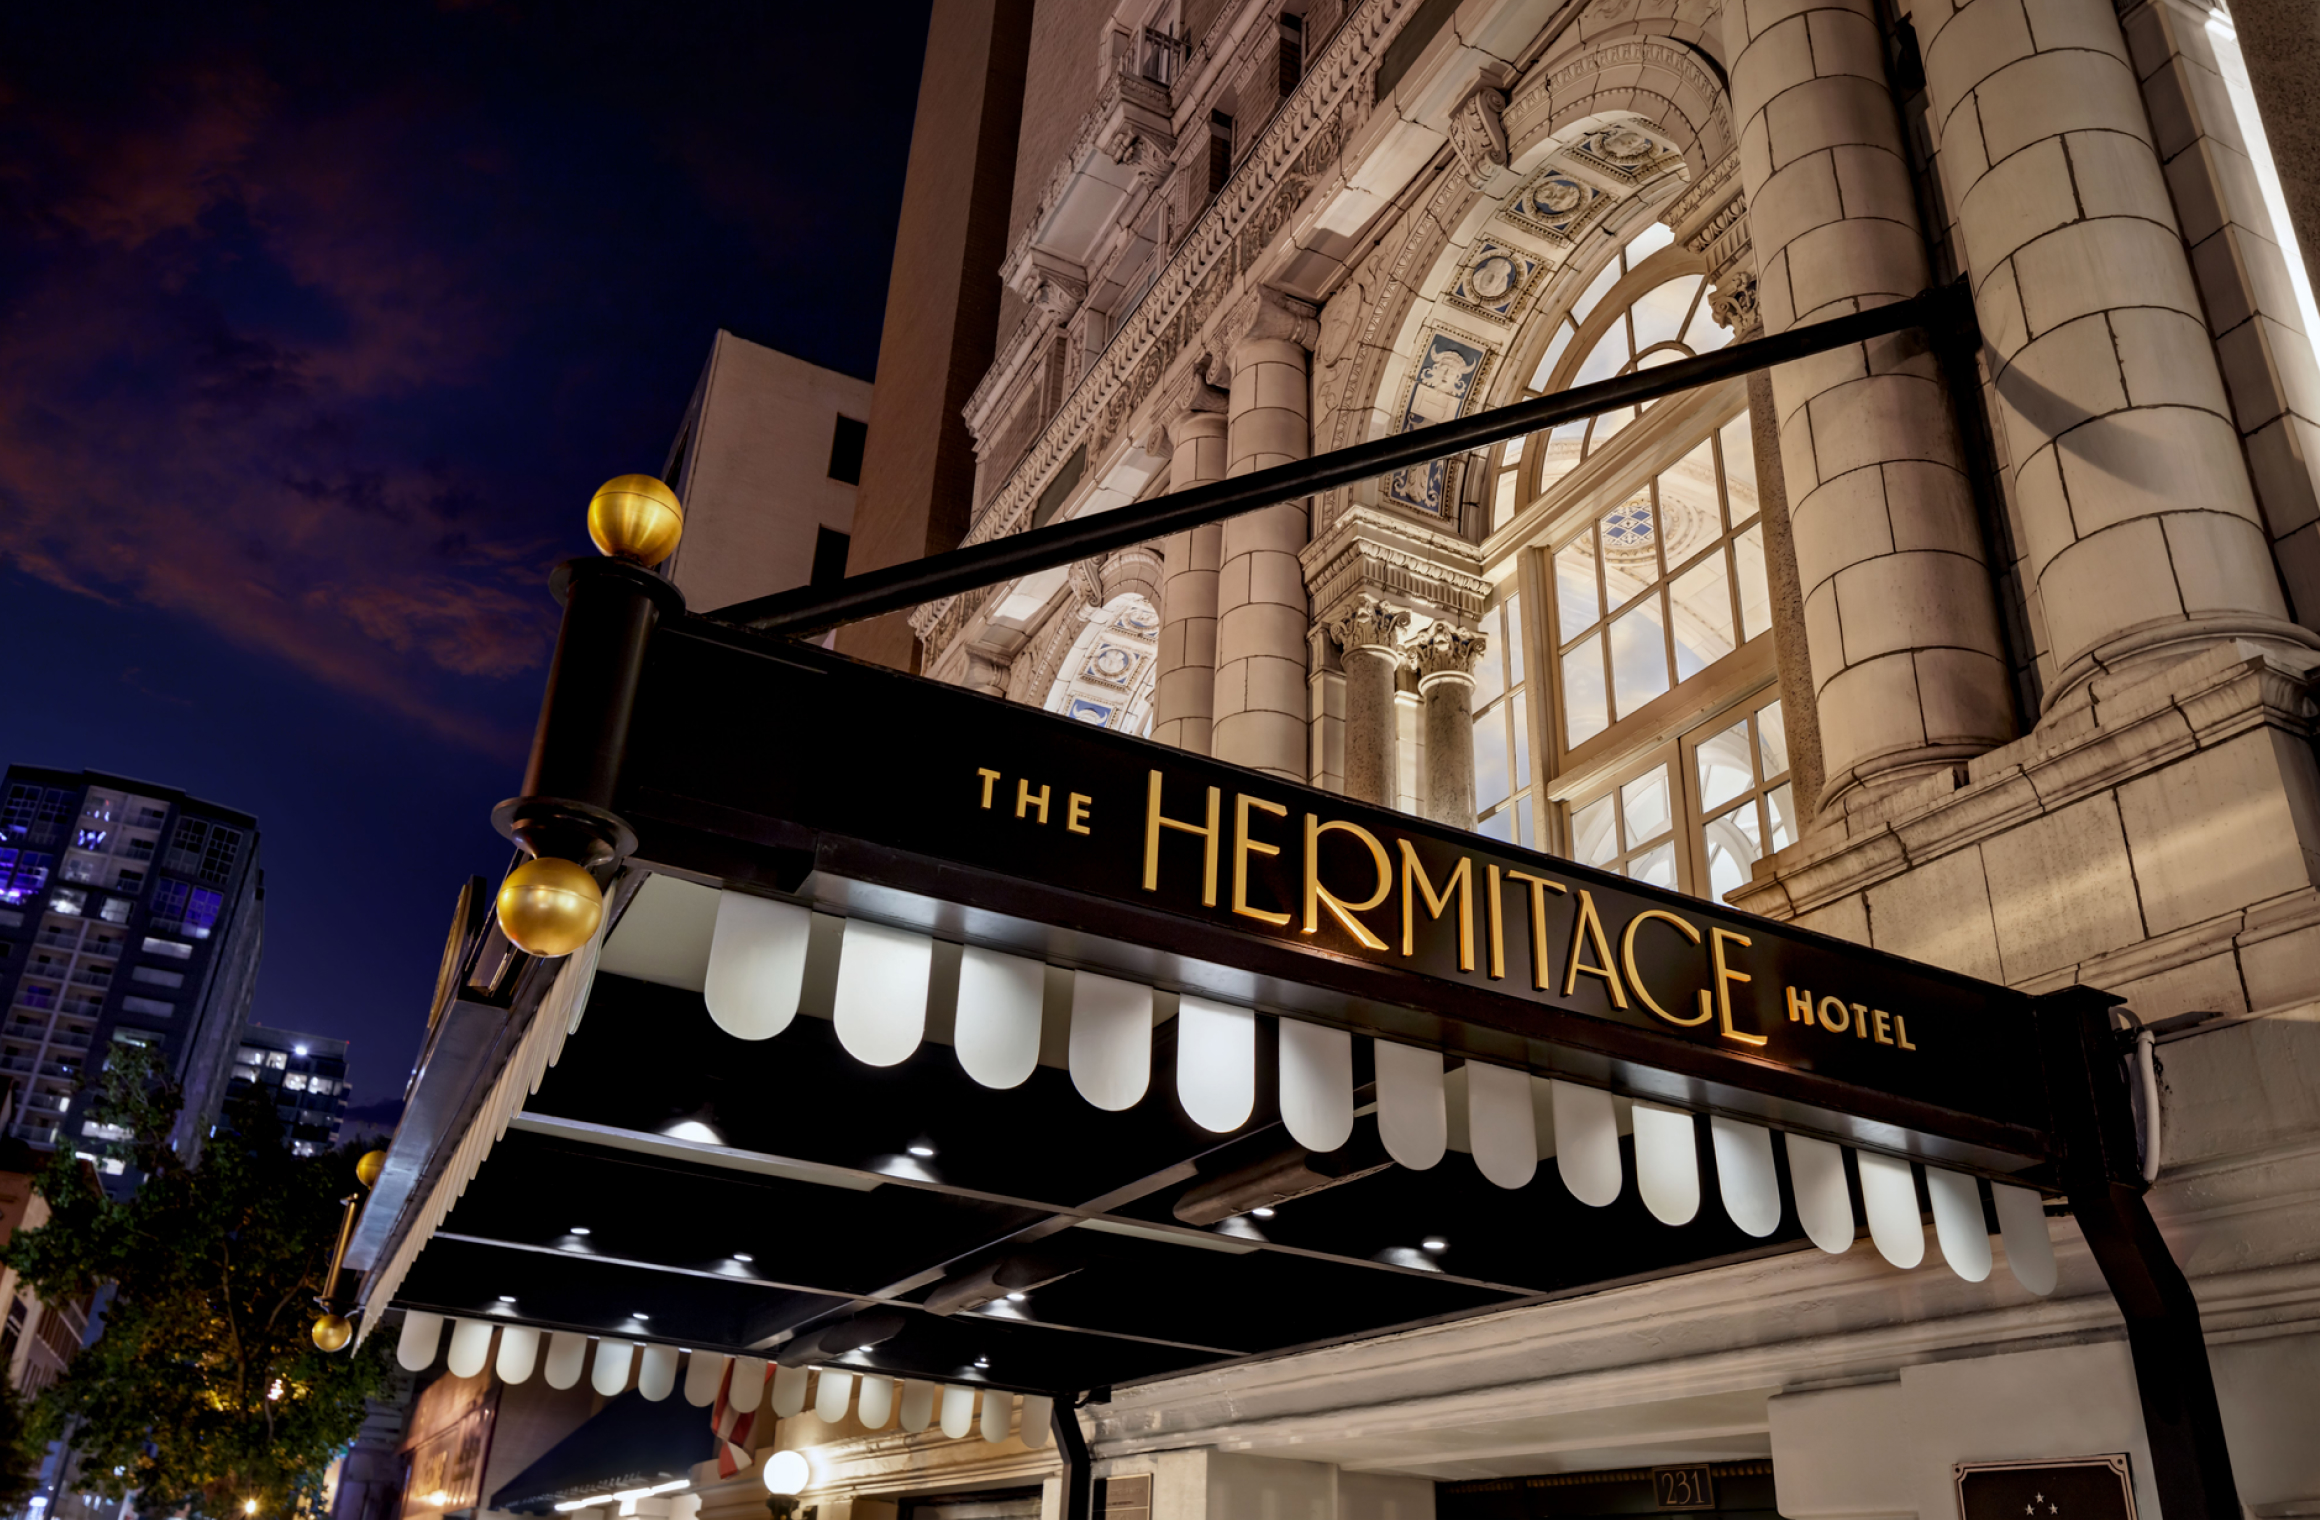 celebrate Mother's Day with a tea party at the hermitage hotel in Nashville
